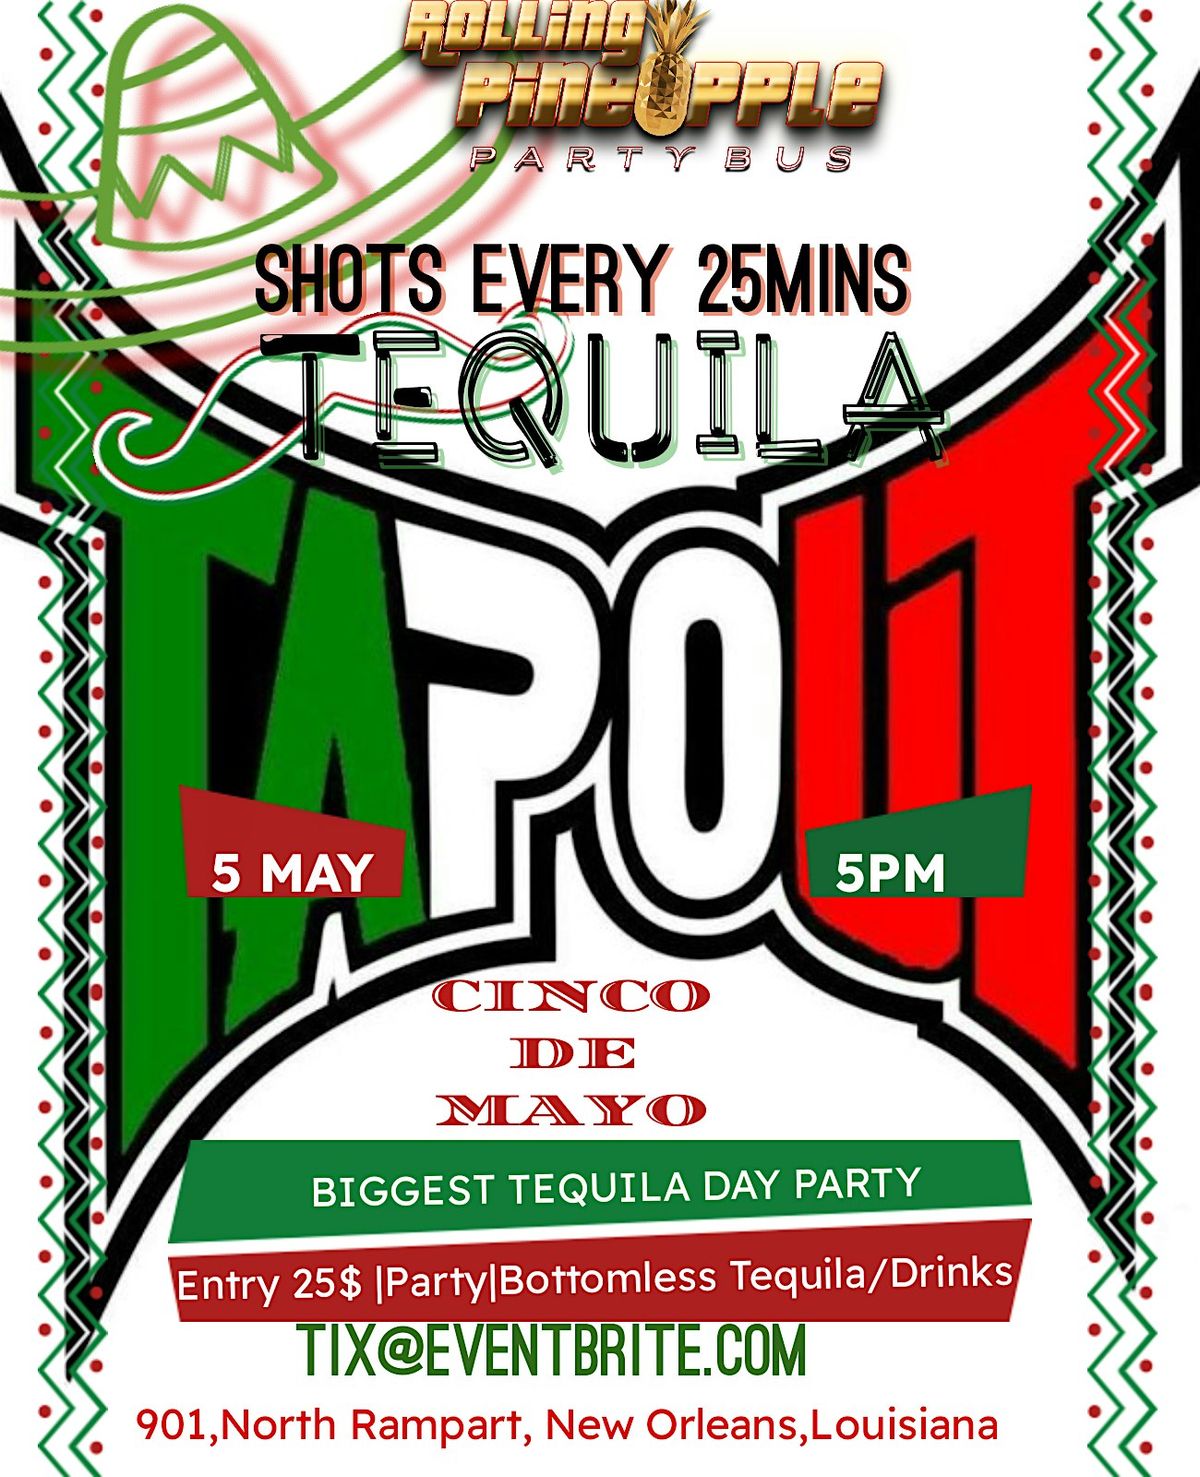 Biggest tequila fueled party ever "TEQUILA TAPOUT " Cinco de mayo party